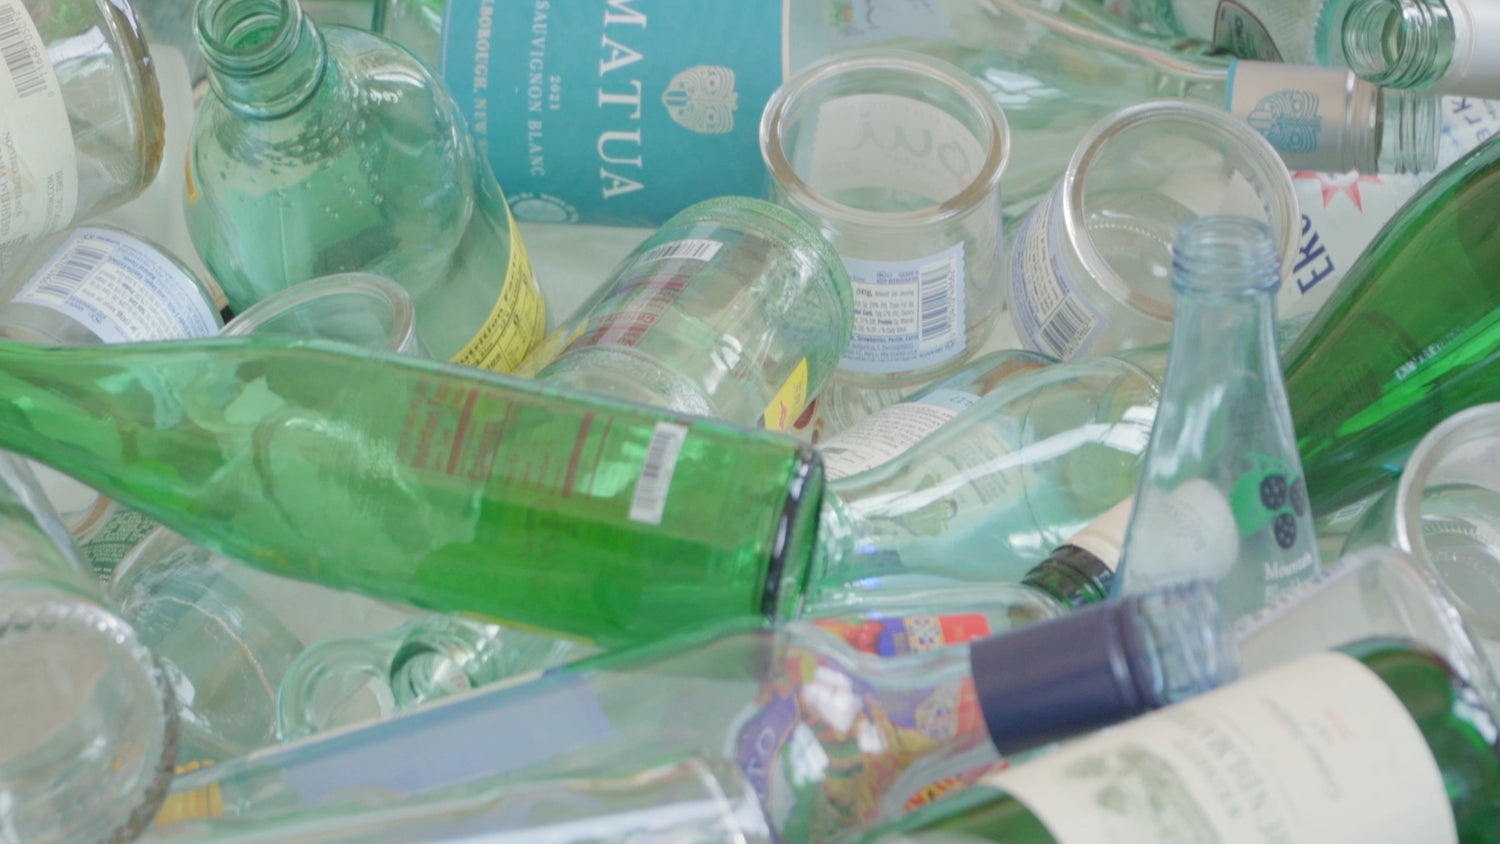 Overview shot of recycled glass bottles that are clear, green, and blue